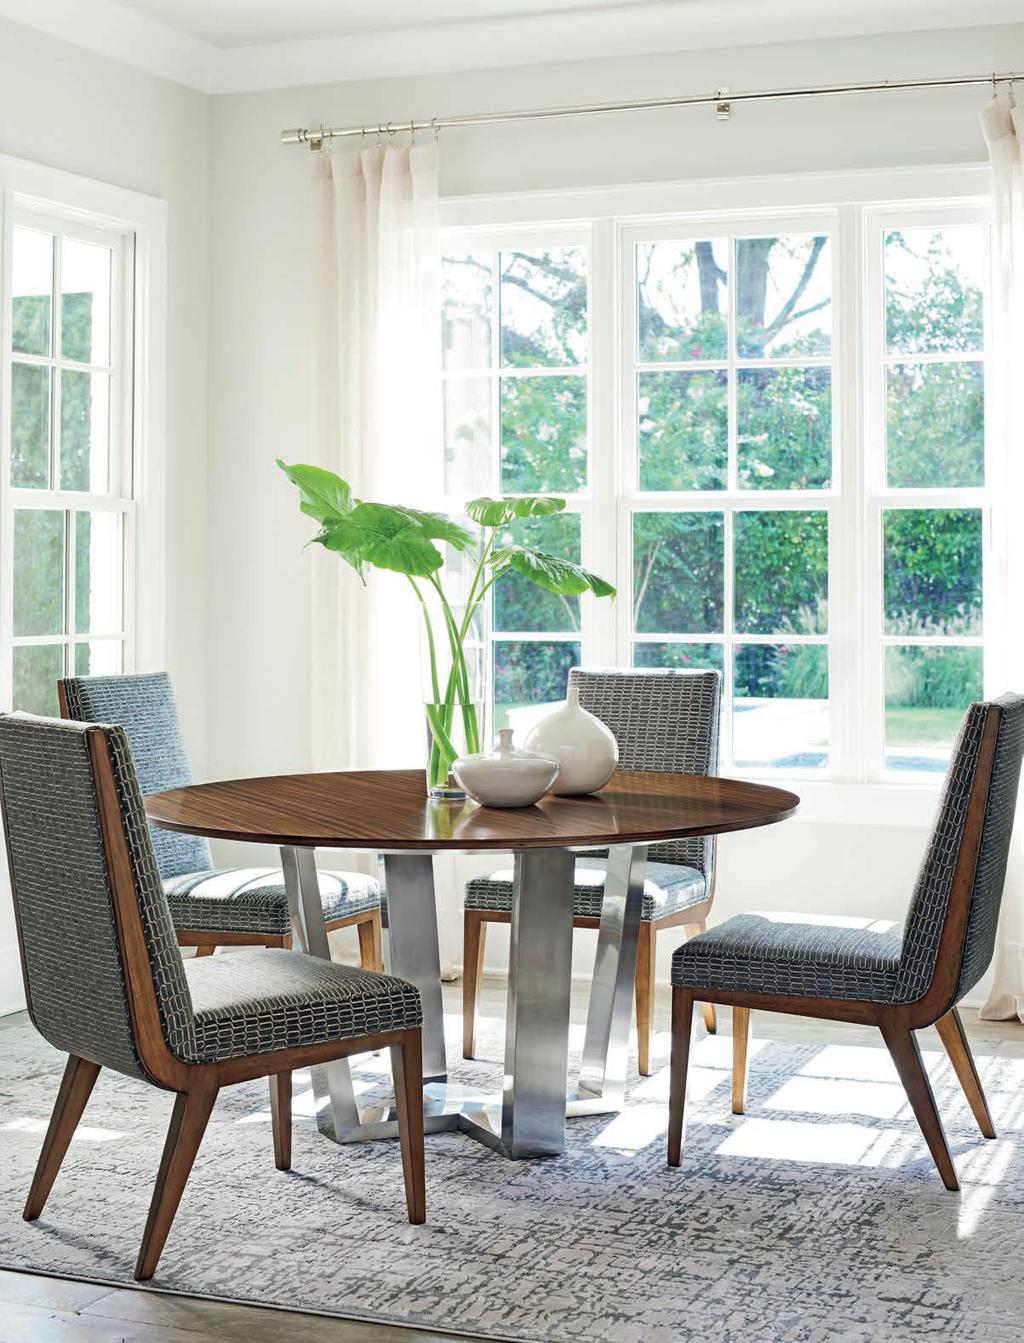 The 60-inch Mandara dining table is supported by a brushed stainless-steel base.